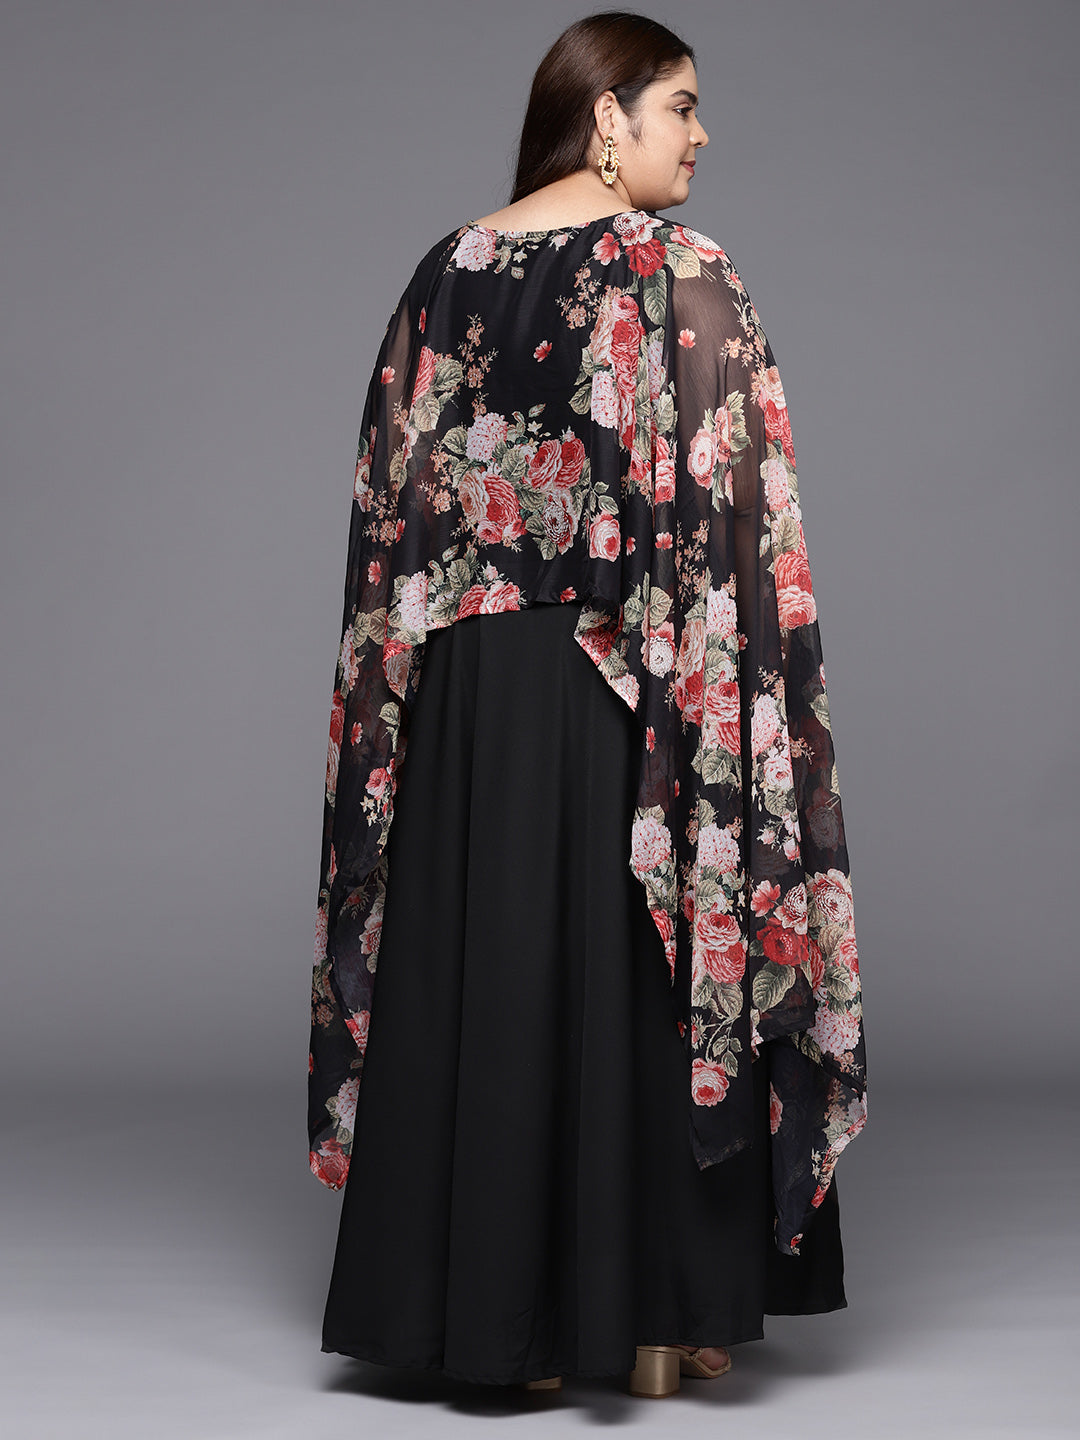 Black & Pink Plus Size Maxi Ethnic Dress with Cape